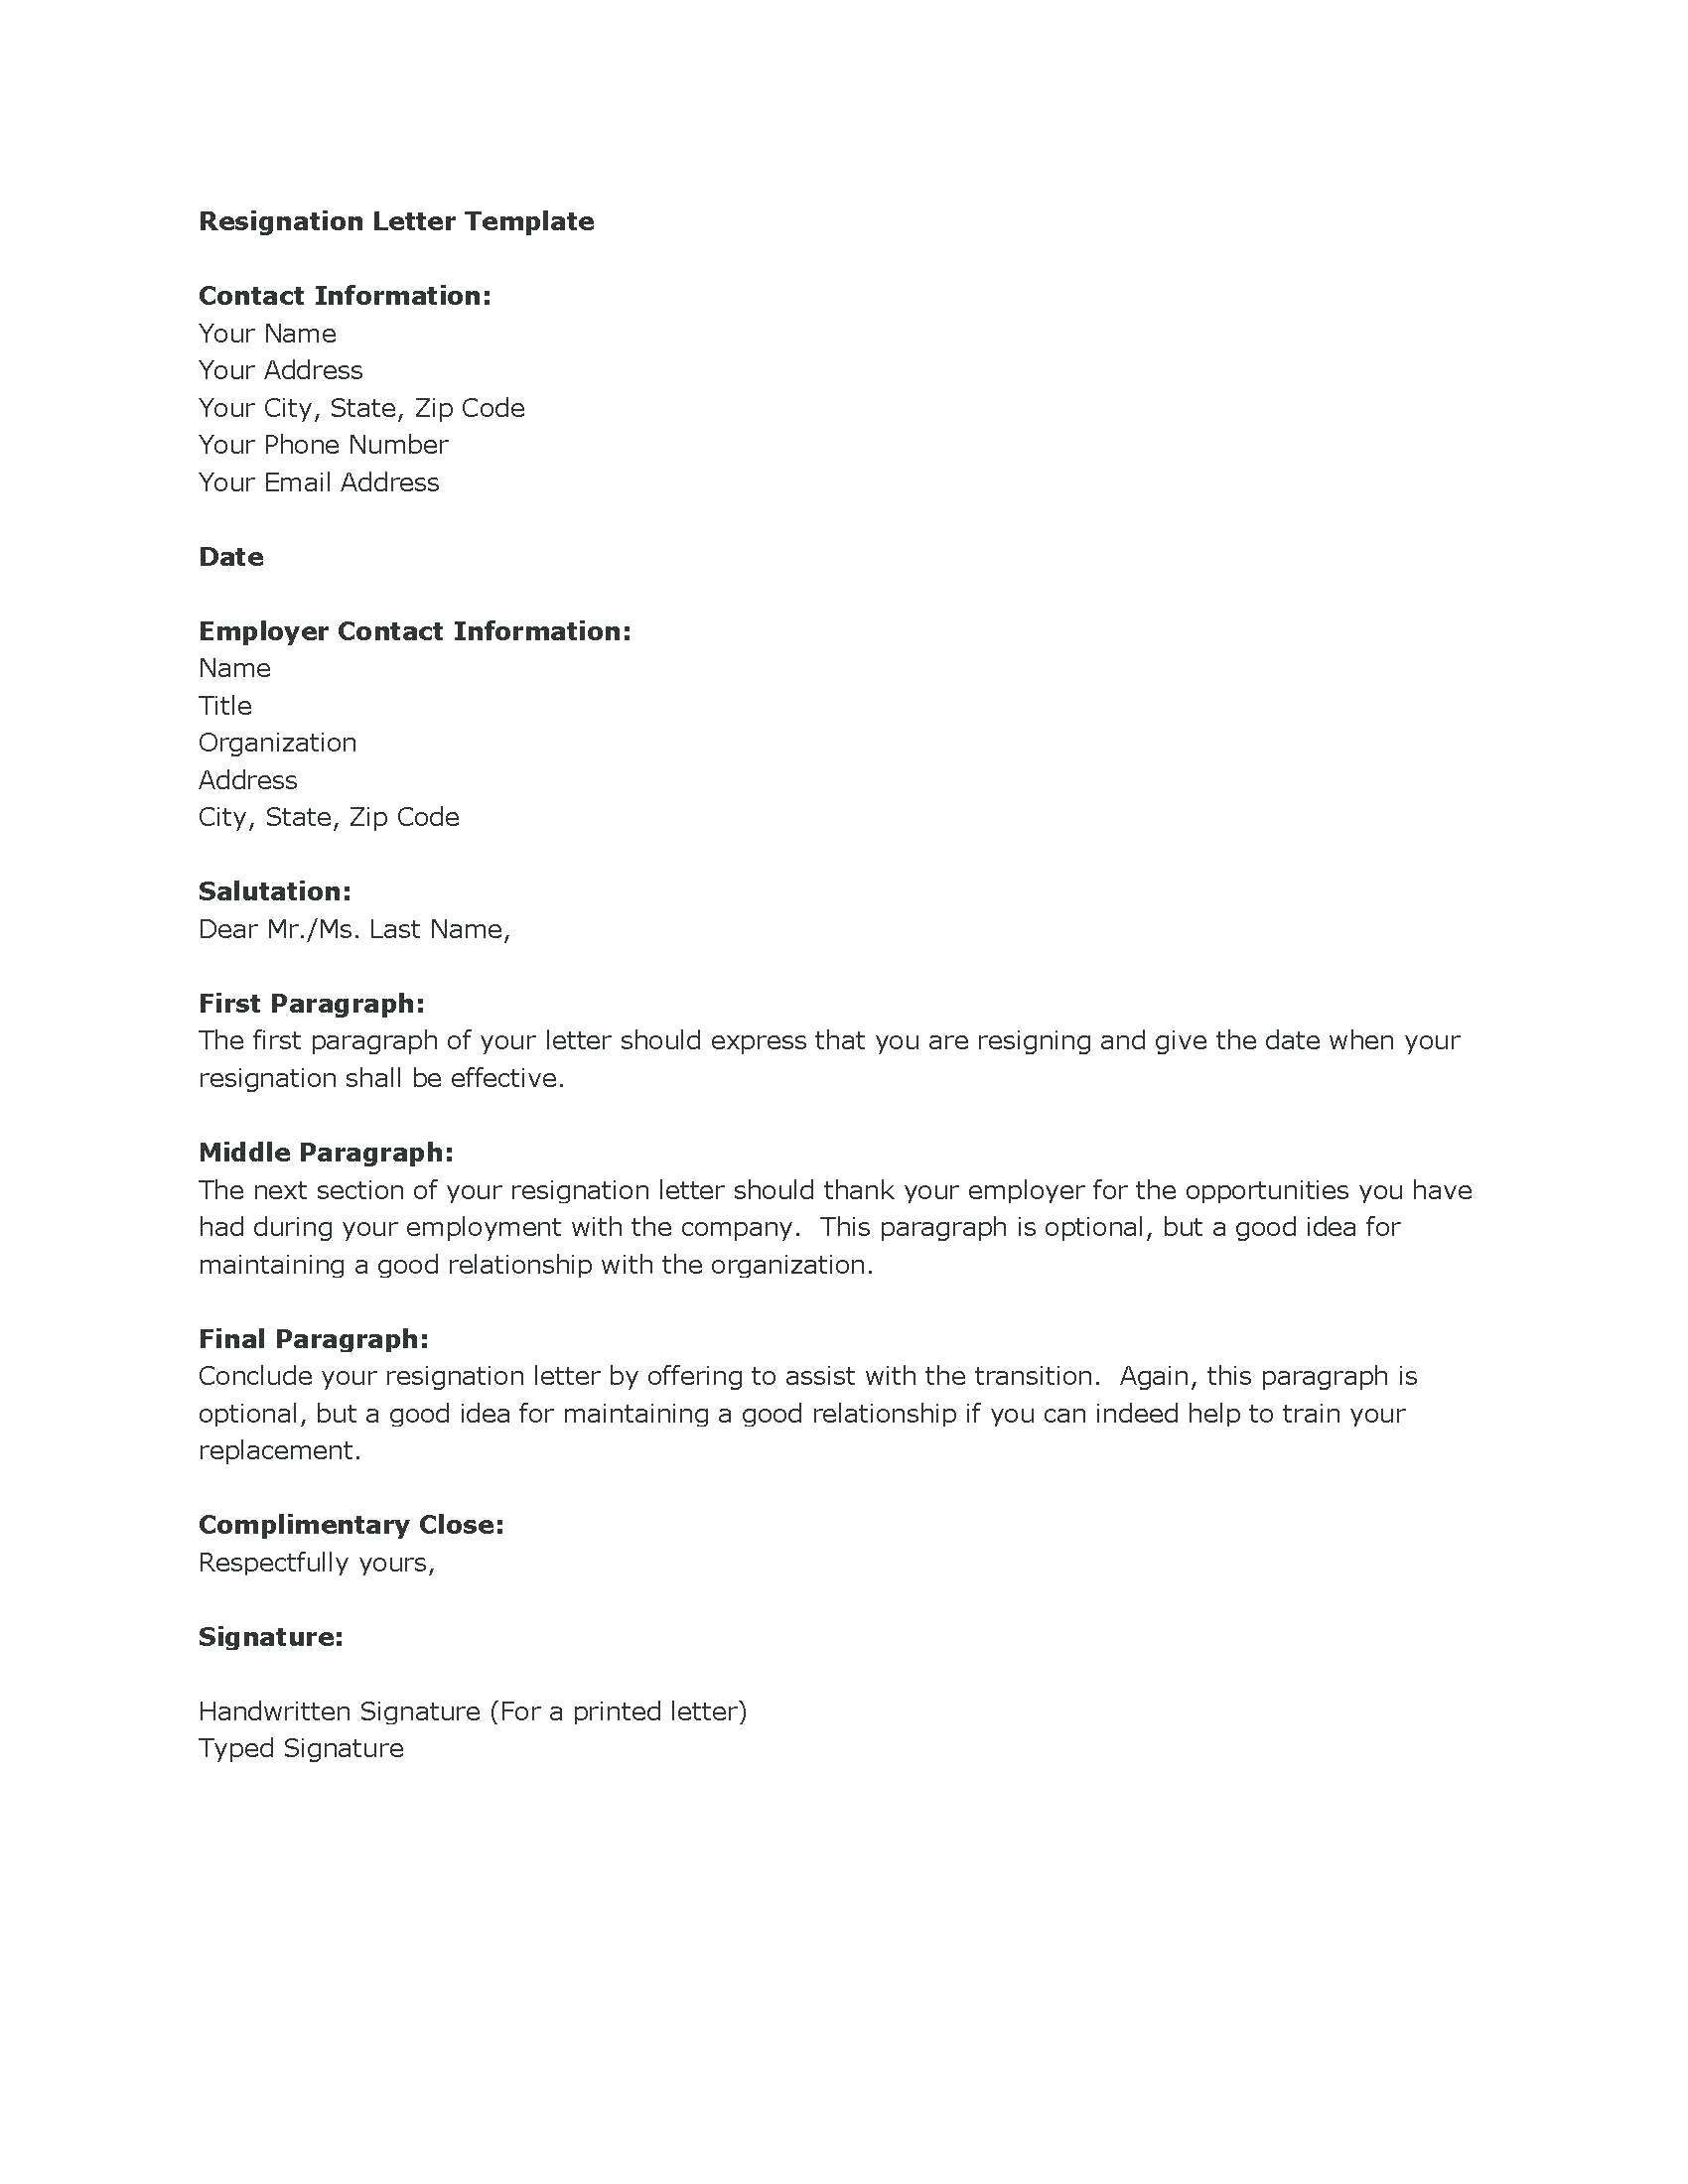 Microsoft Office Resignation Letter Template Samples Letter Template Collection